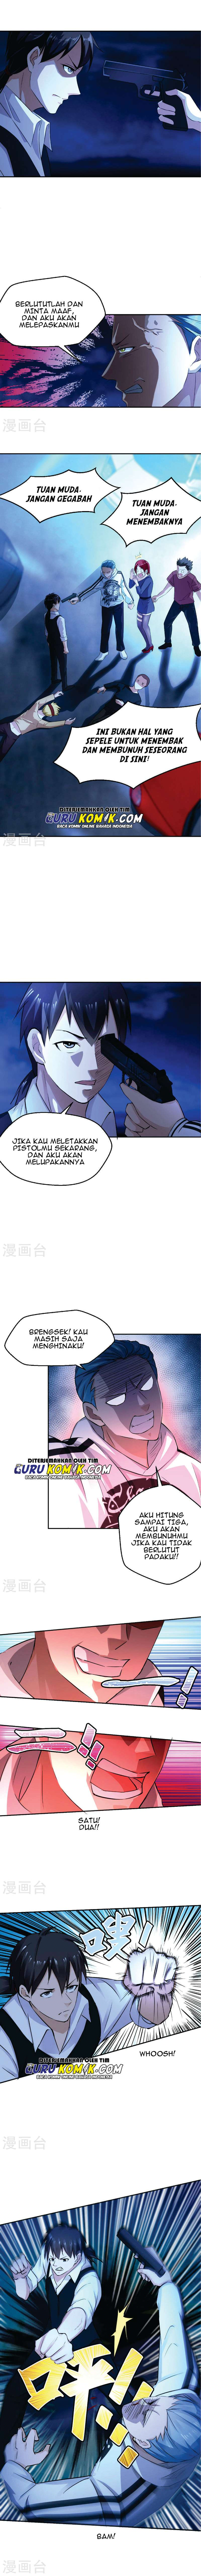 Close Mad Doctor Chapter 44-47